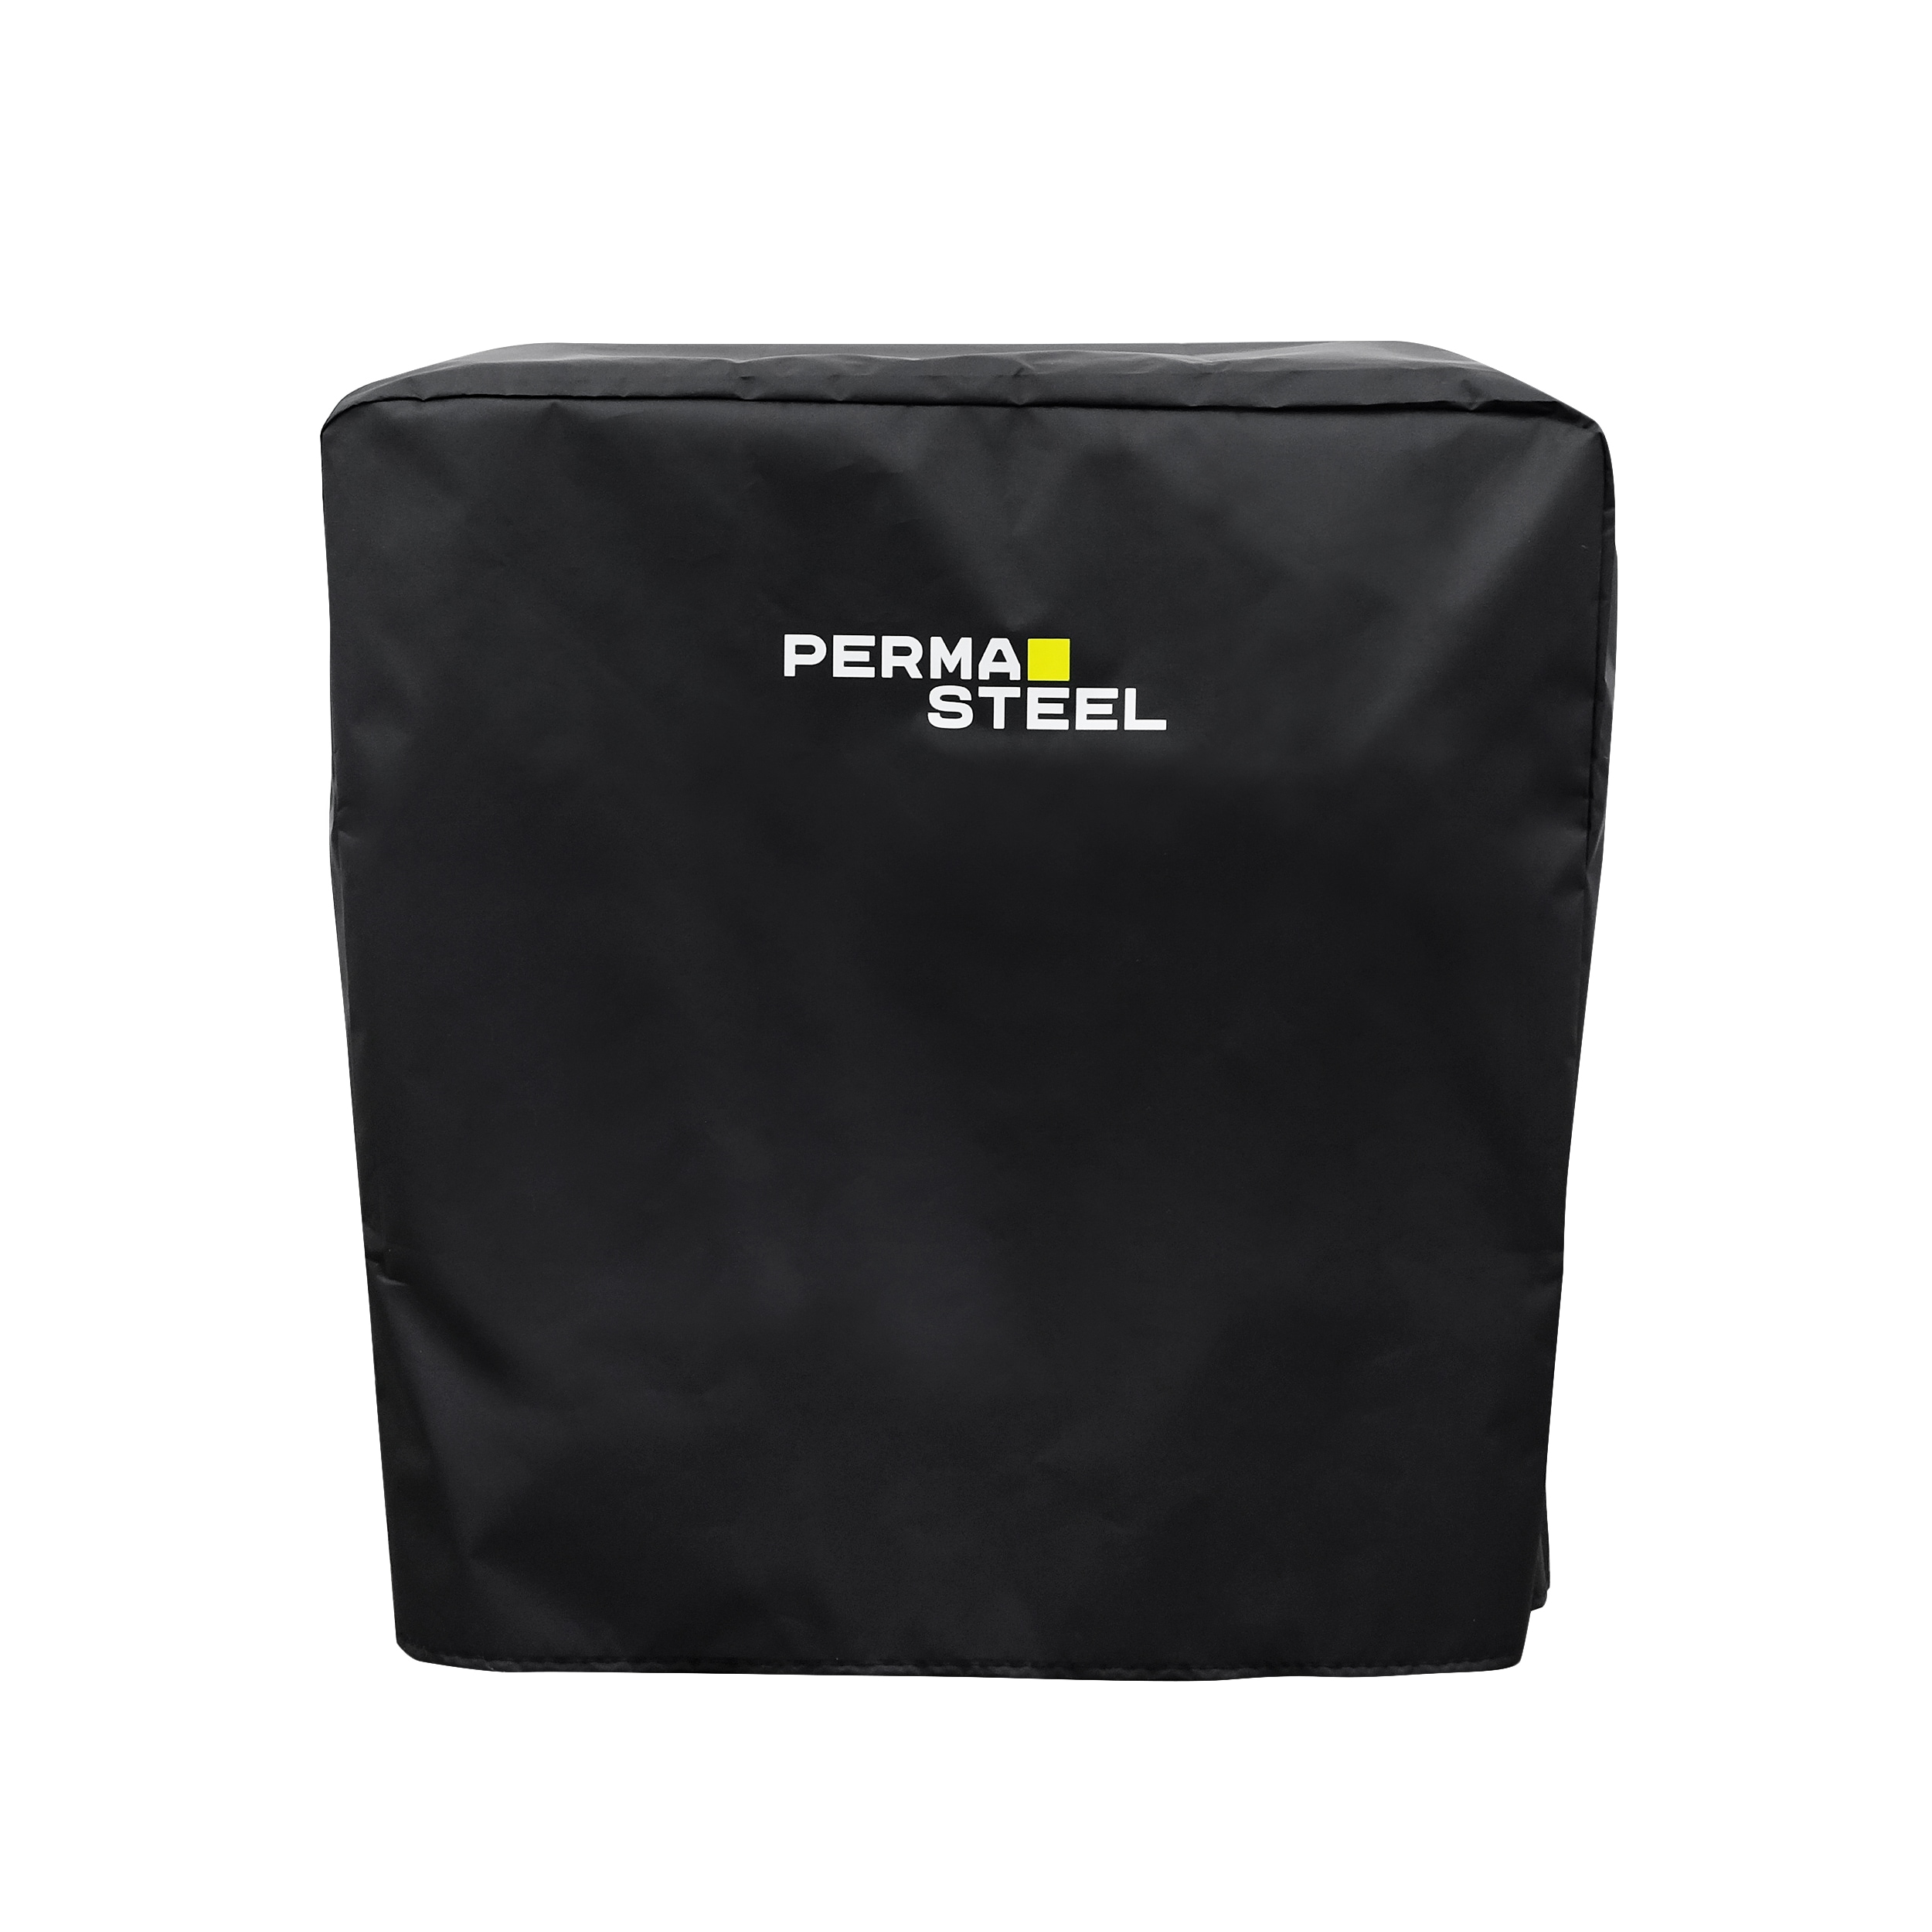 Permasteel Black Cooler Cover for 60-Quart Patio Coolers, Weatherproof and  UV-Resistant, Lightweight Polyester Material in the Portable Cooler  Accessories department at